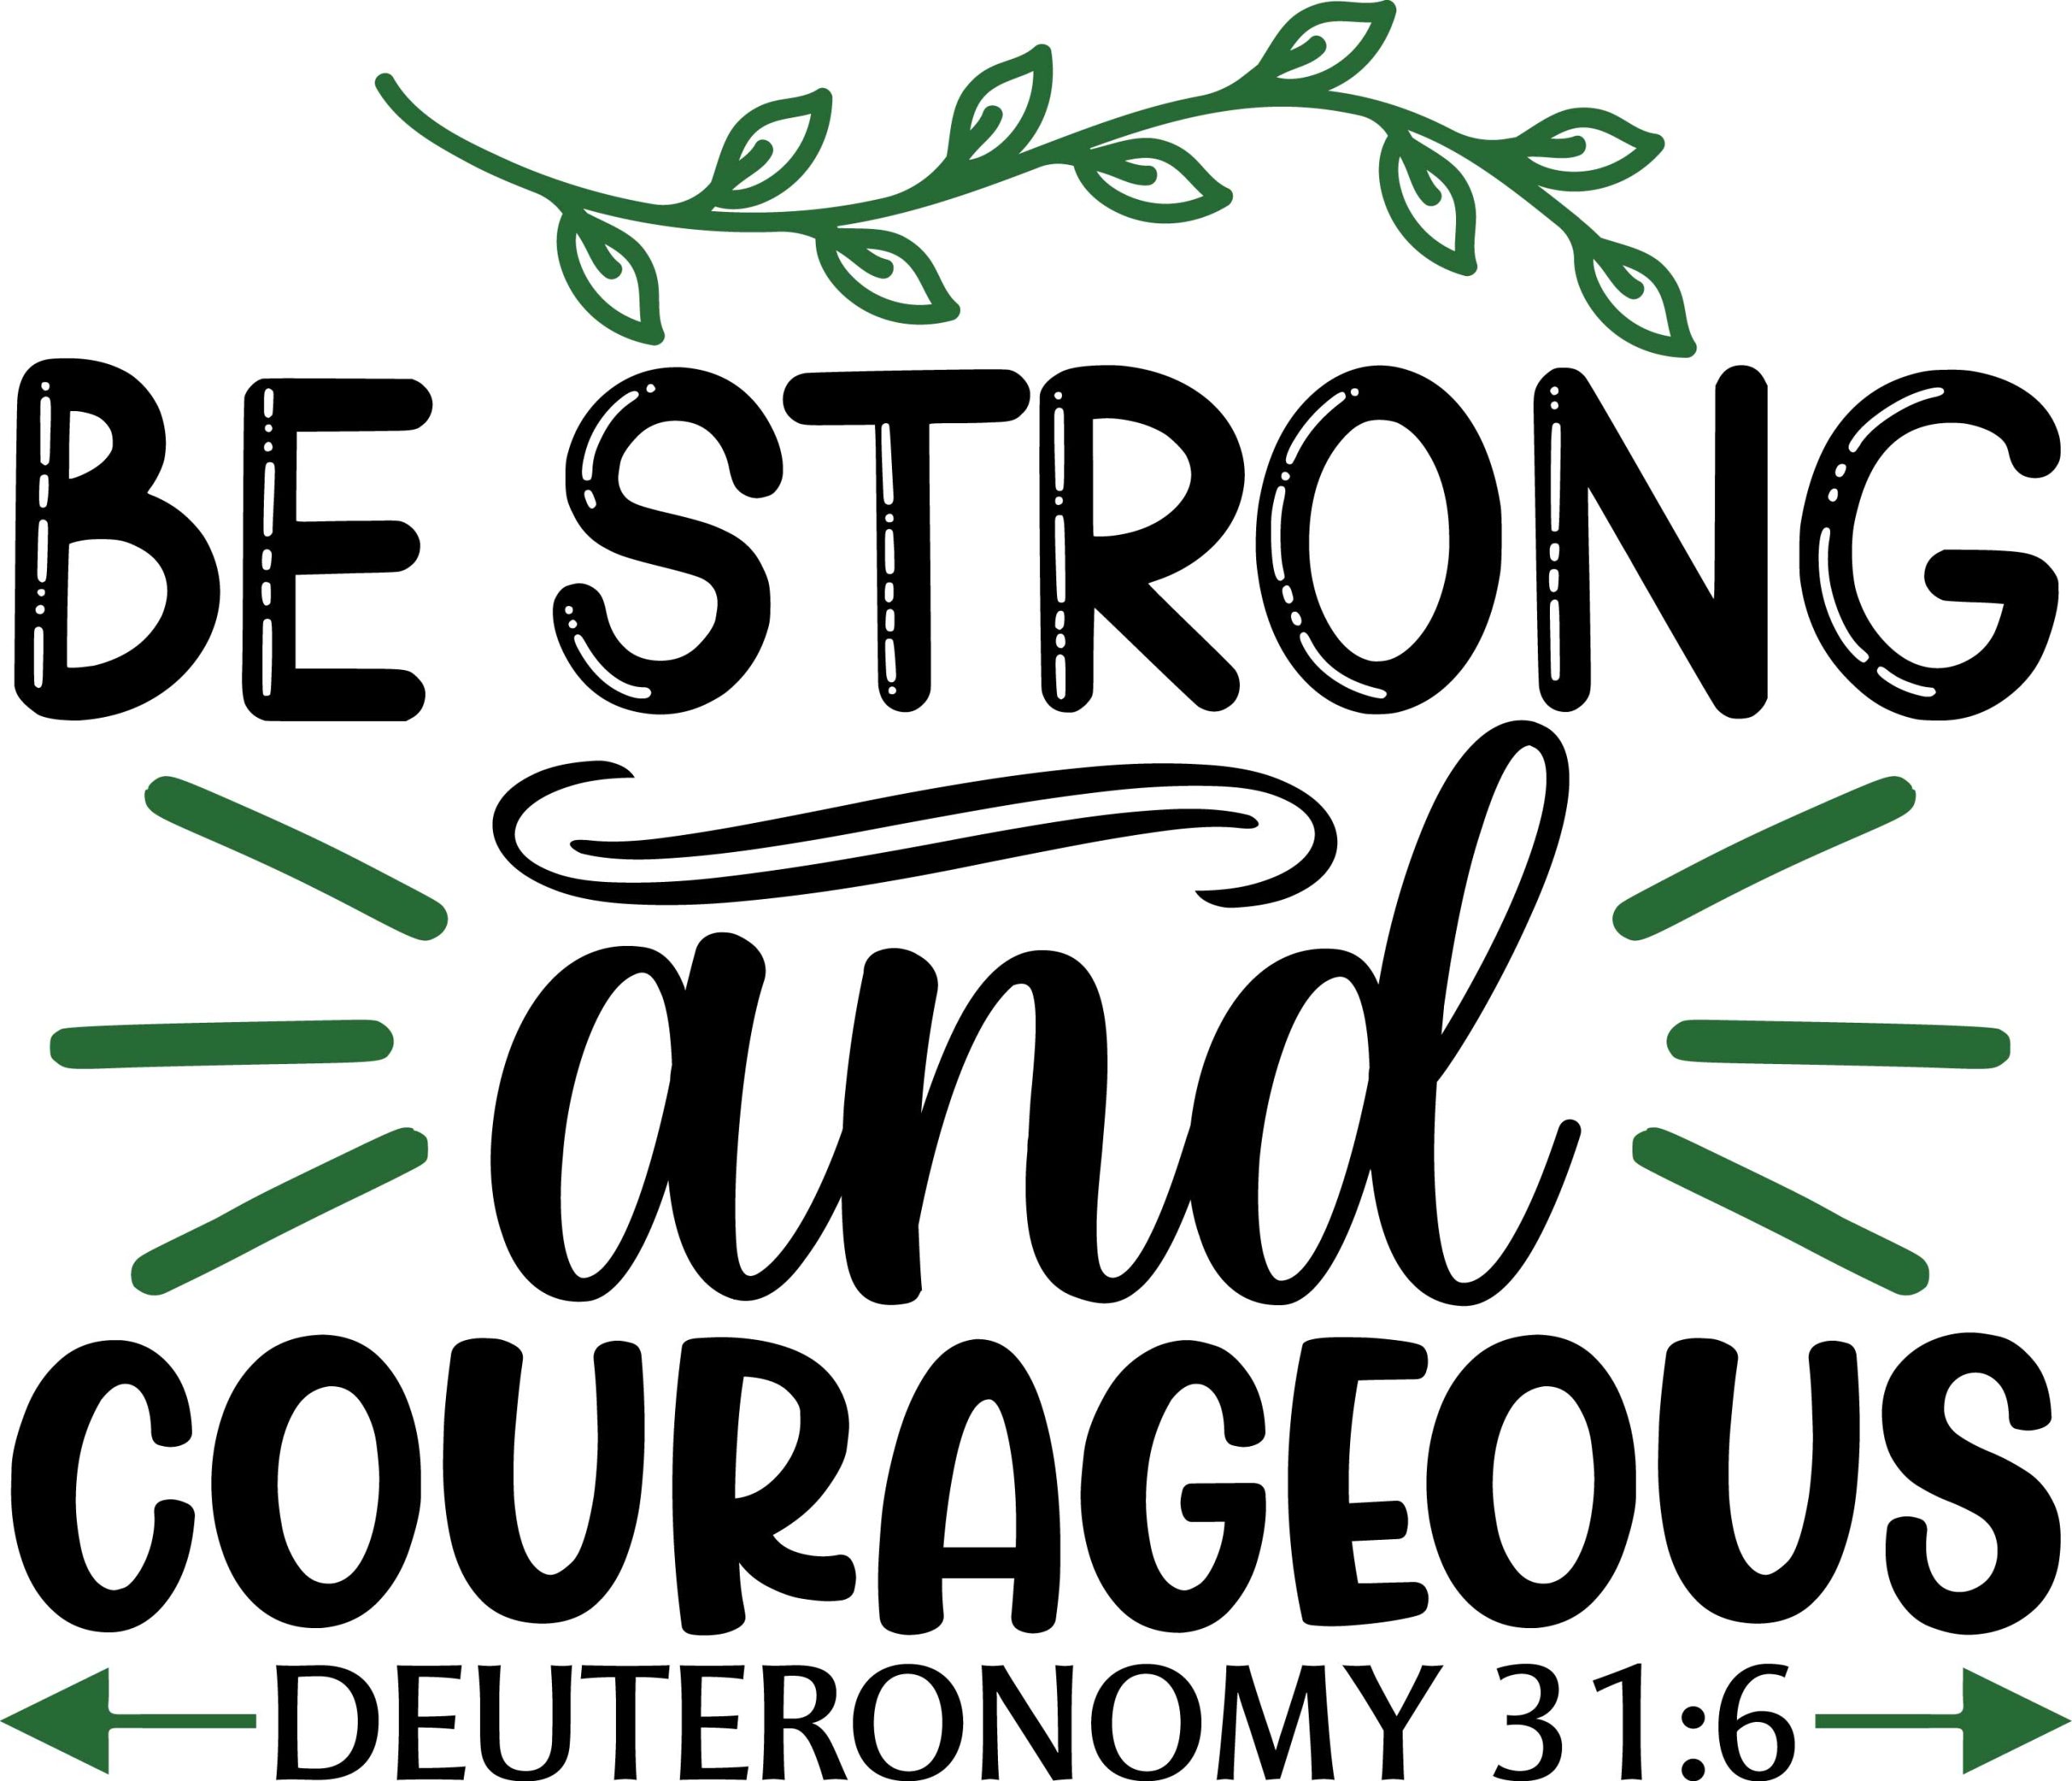 Be strong and courageous Deuteronomy 1:9, bible verses, scripture verses, svg files, passages, sayings, cricut designs, silhouette, embroidery, bundle, free cut files, design space, vector